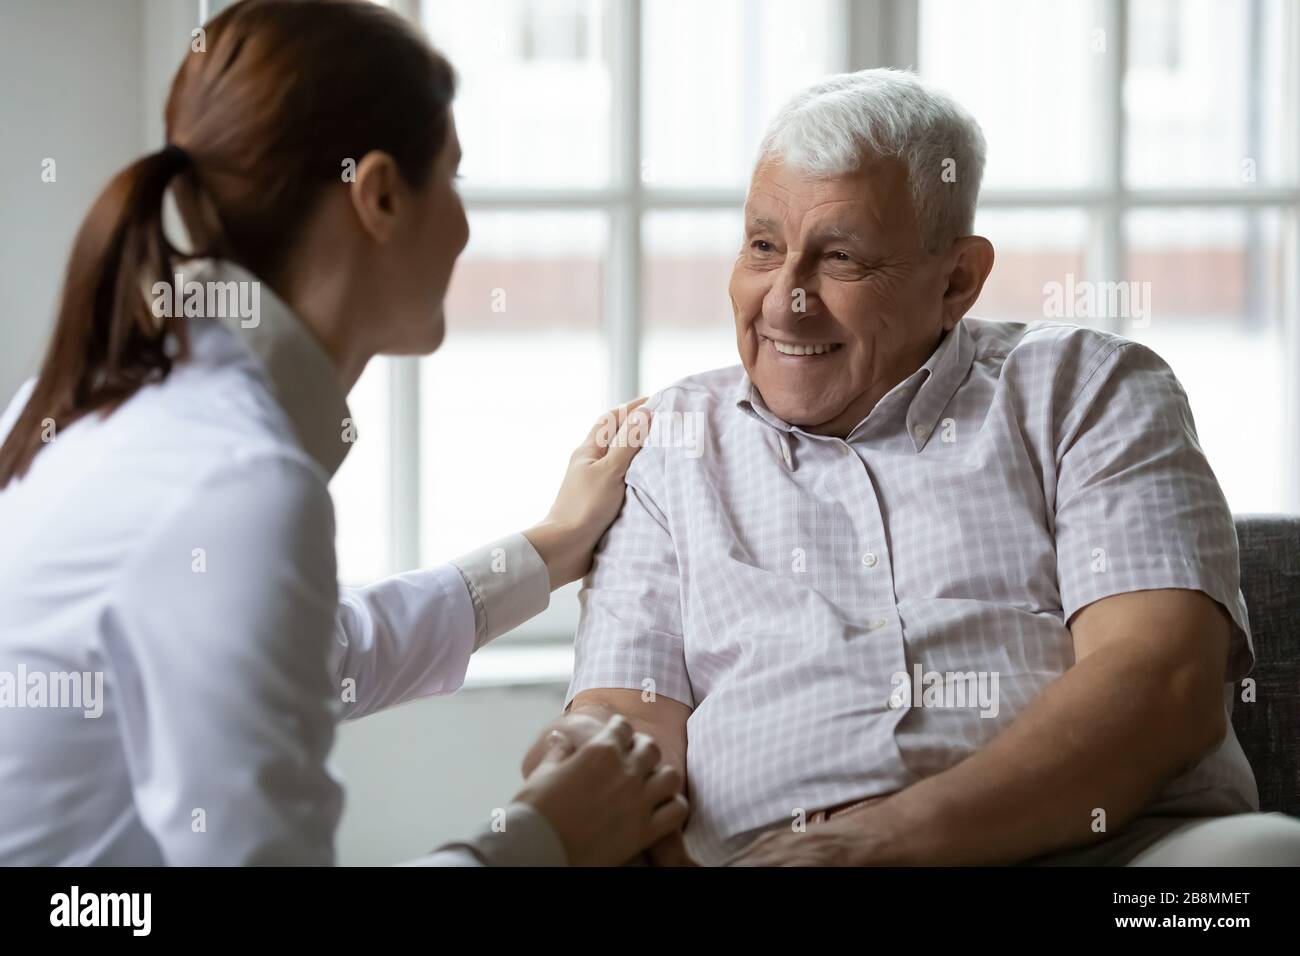 Nurse talks to old patient holds his hand showing kindness Stock Photo